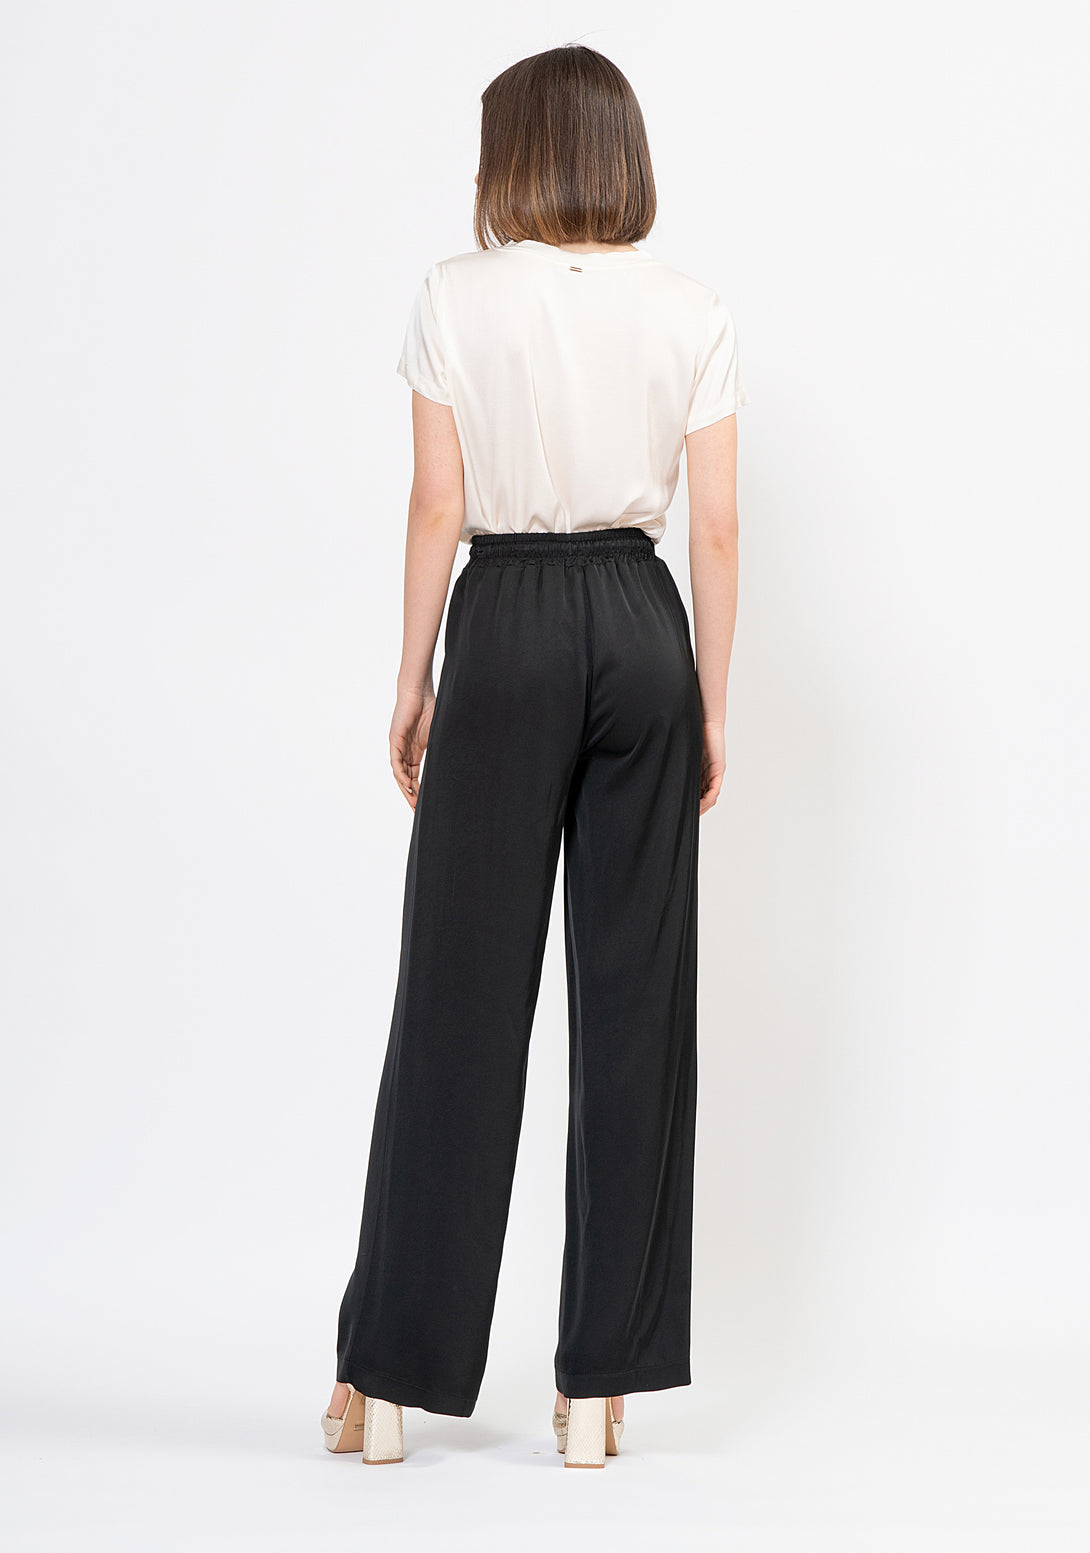 Palazzo pant wide fit made in soft viscose